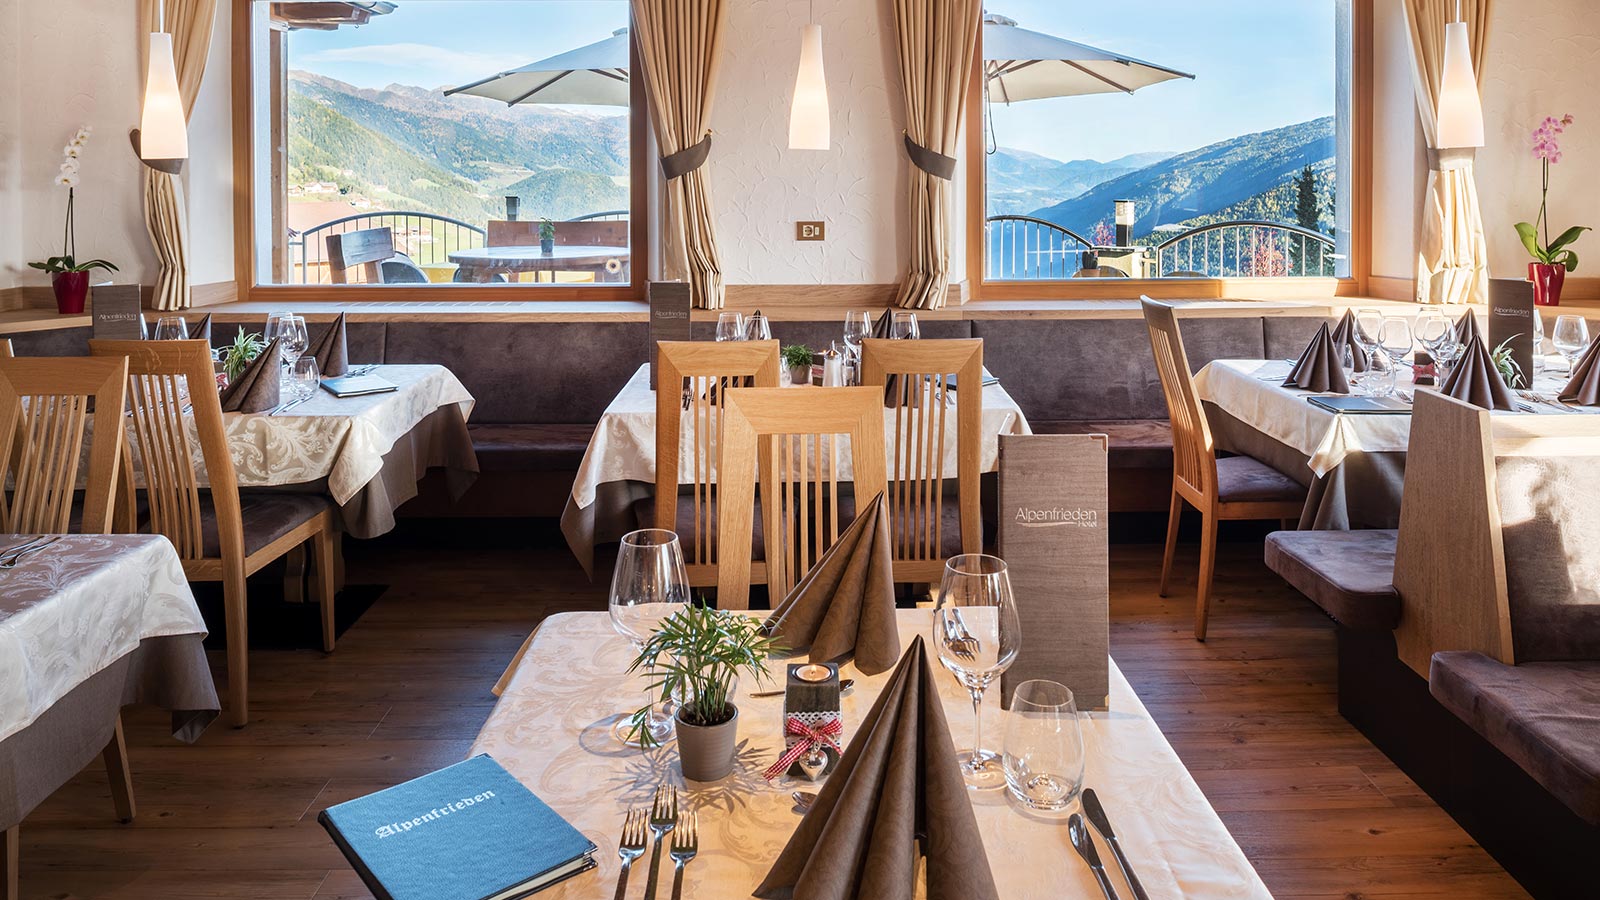 a table prepared for lunch at Hotel Alpenfrieden in summer